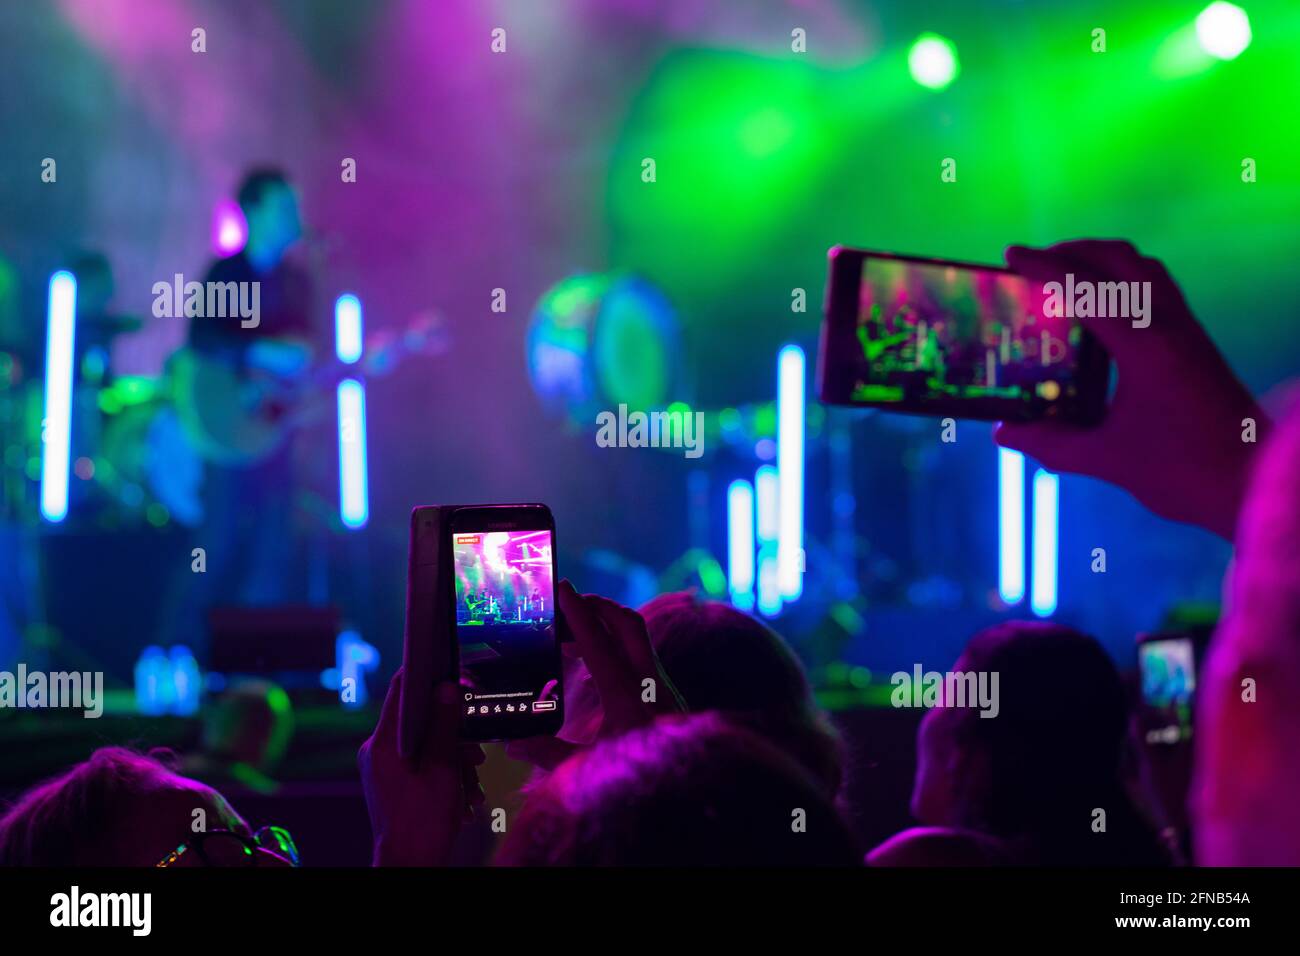 Public recording and using smartphones on live music festivals, handling smartphones to record live performances. Music festivals light colors and crowd Stock Photo